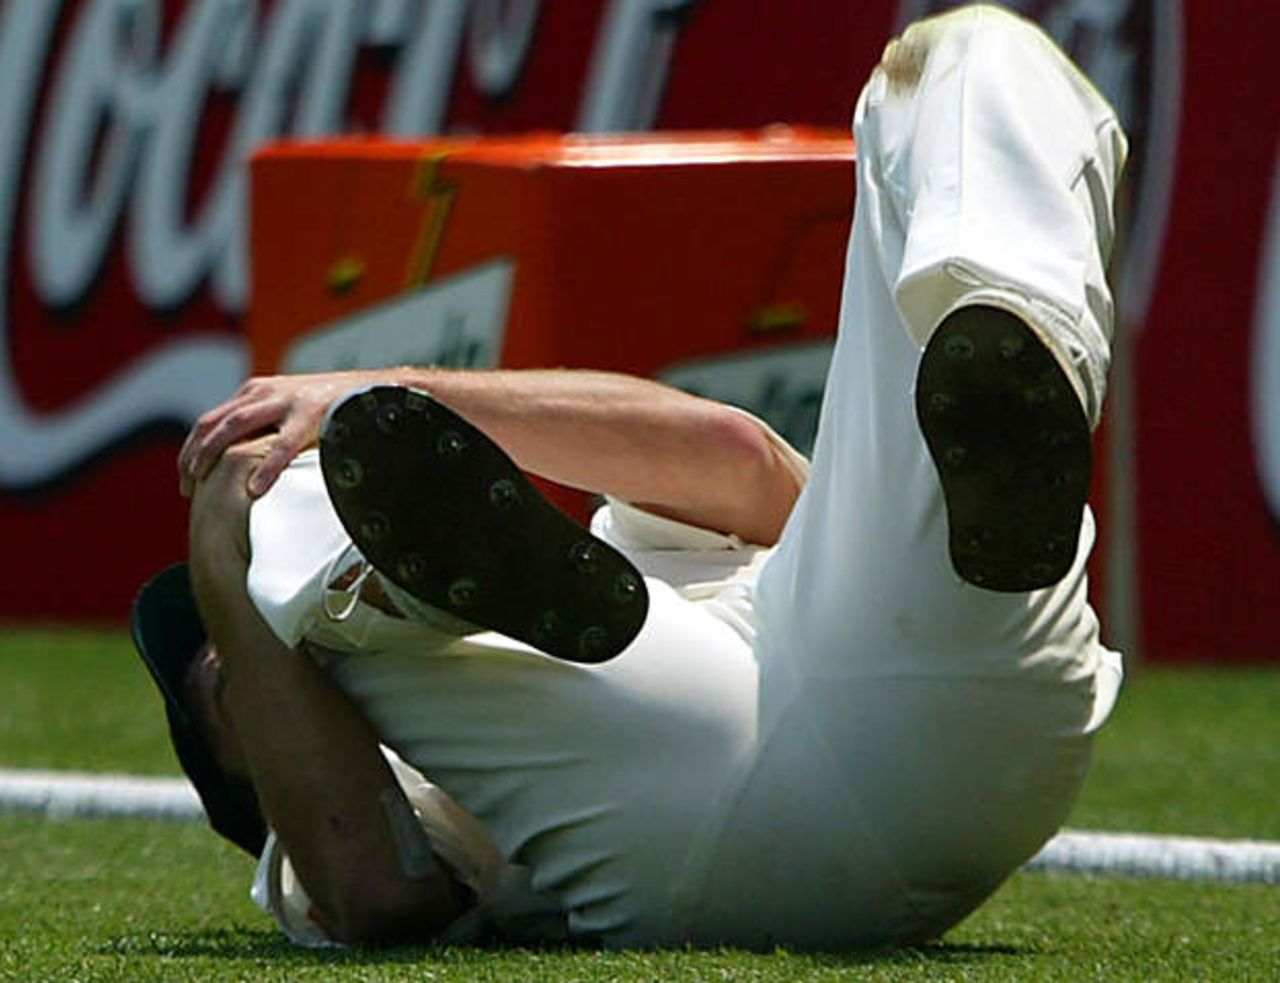 England's Simon Jones lies on the ground after injuring his knee while fielding during the first day's play in the first Ashes test match at the Gabba in Brisbane November 7, 2002.